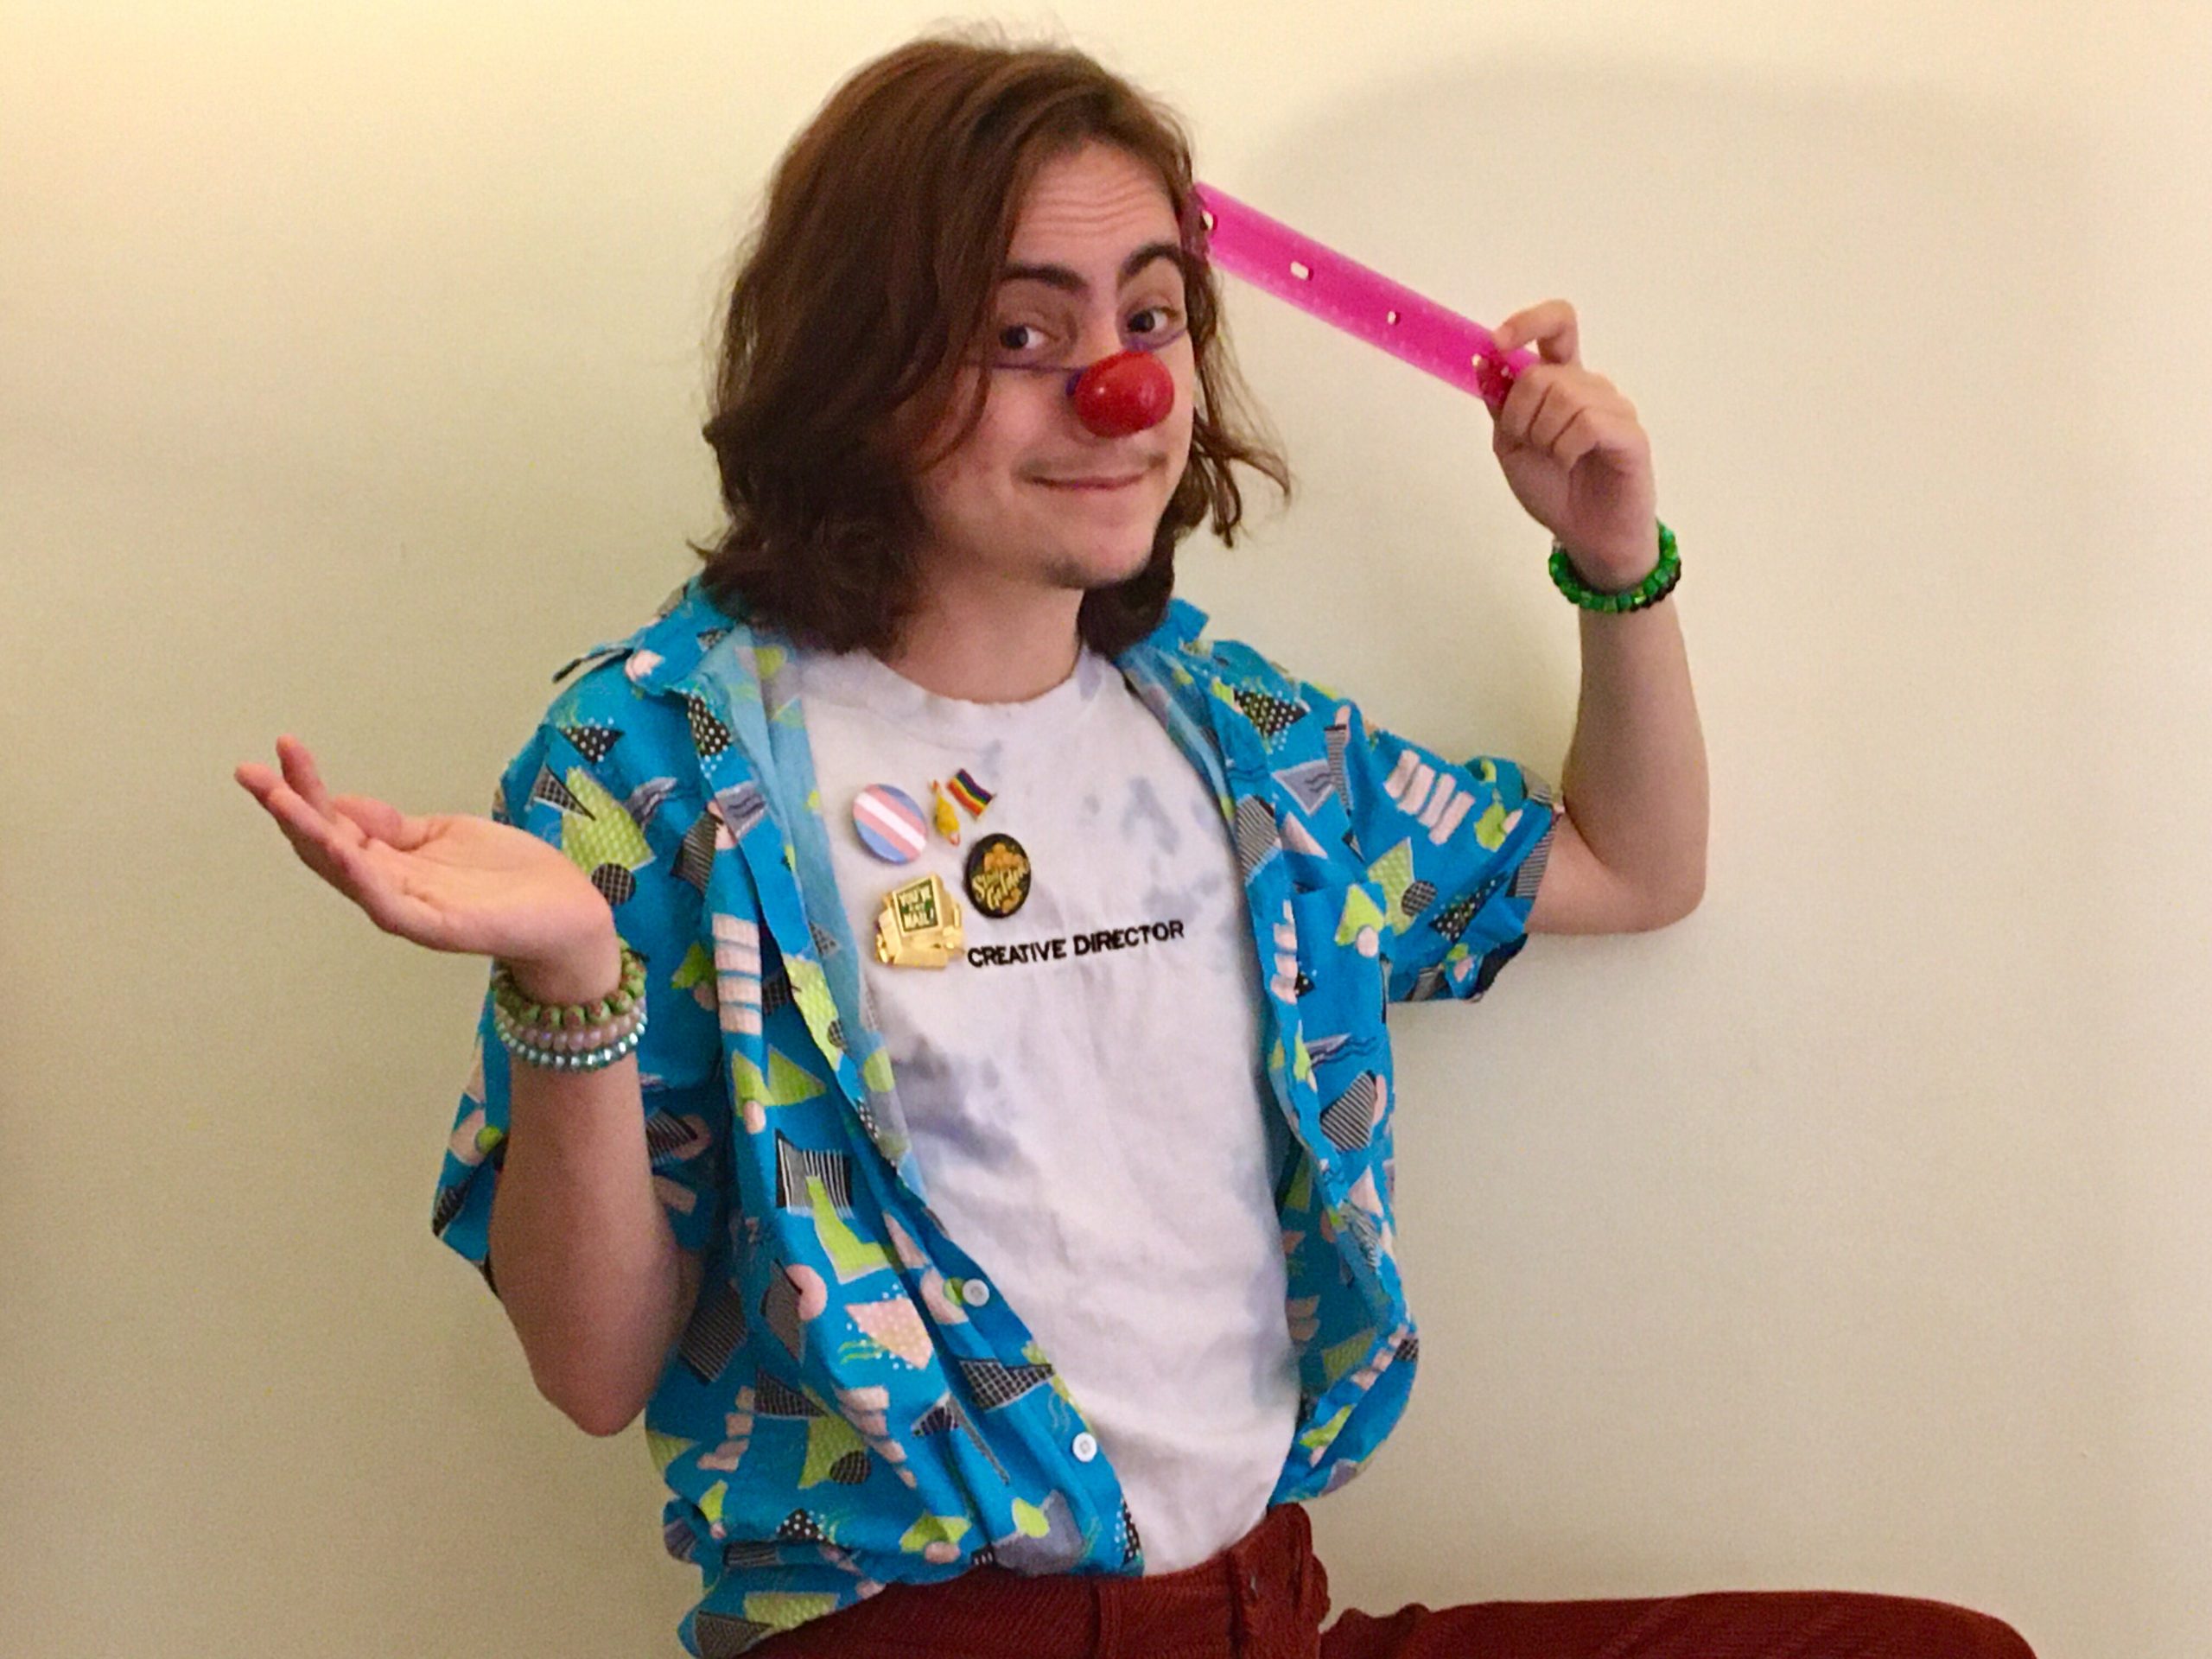 photo of Emmet Abrams, a white transmasculine person with shoulder length light brown hair, an open patterned shirt over a white top with pride pins, and a red clown nose.